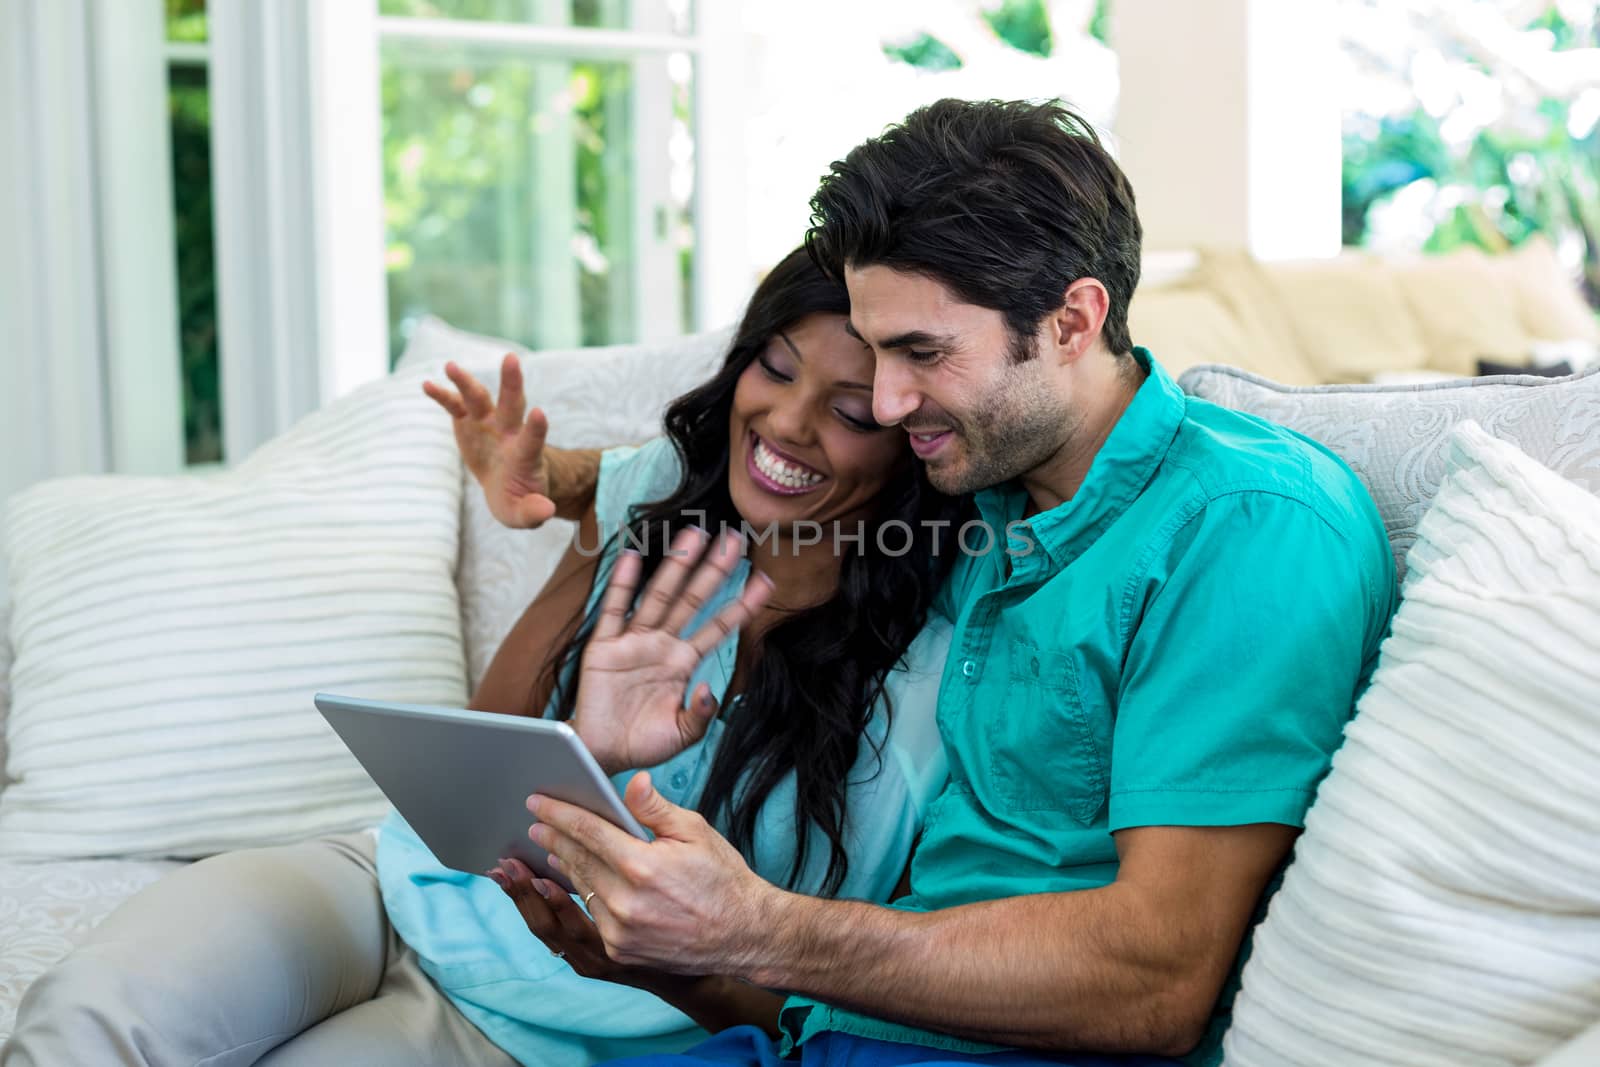 Couple waving hands while using digital tablet for video chat at home